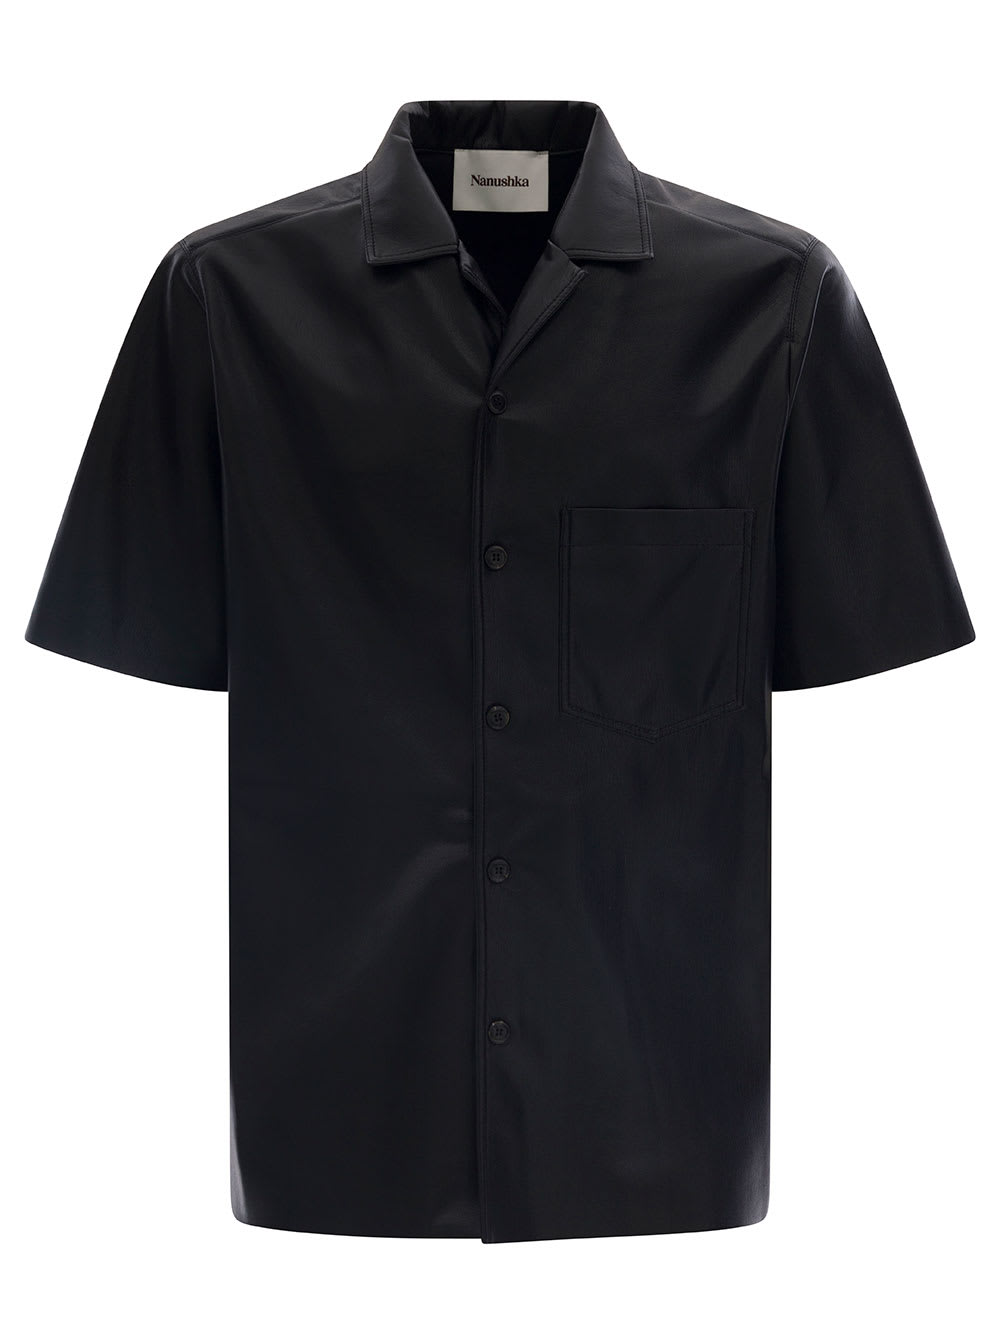 bodil Black Short Sleeve Shirt In Faux Leather Man